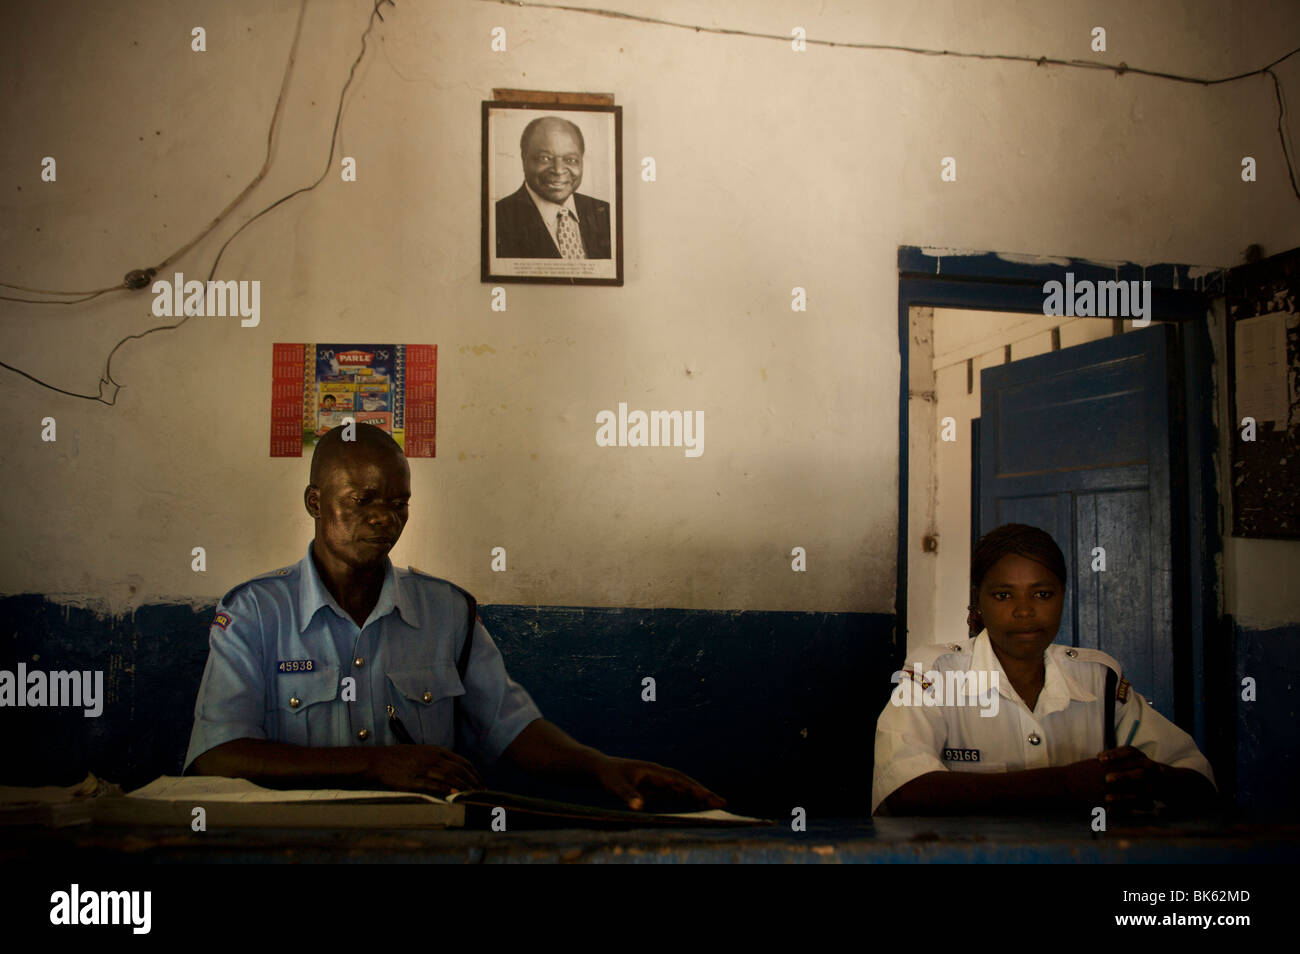 Officers stand behind the main desk of the Lamu island police station on September 8, 2009, Kenya. Stock Photo